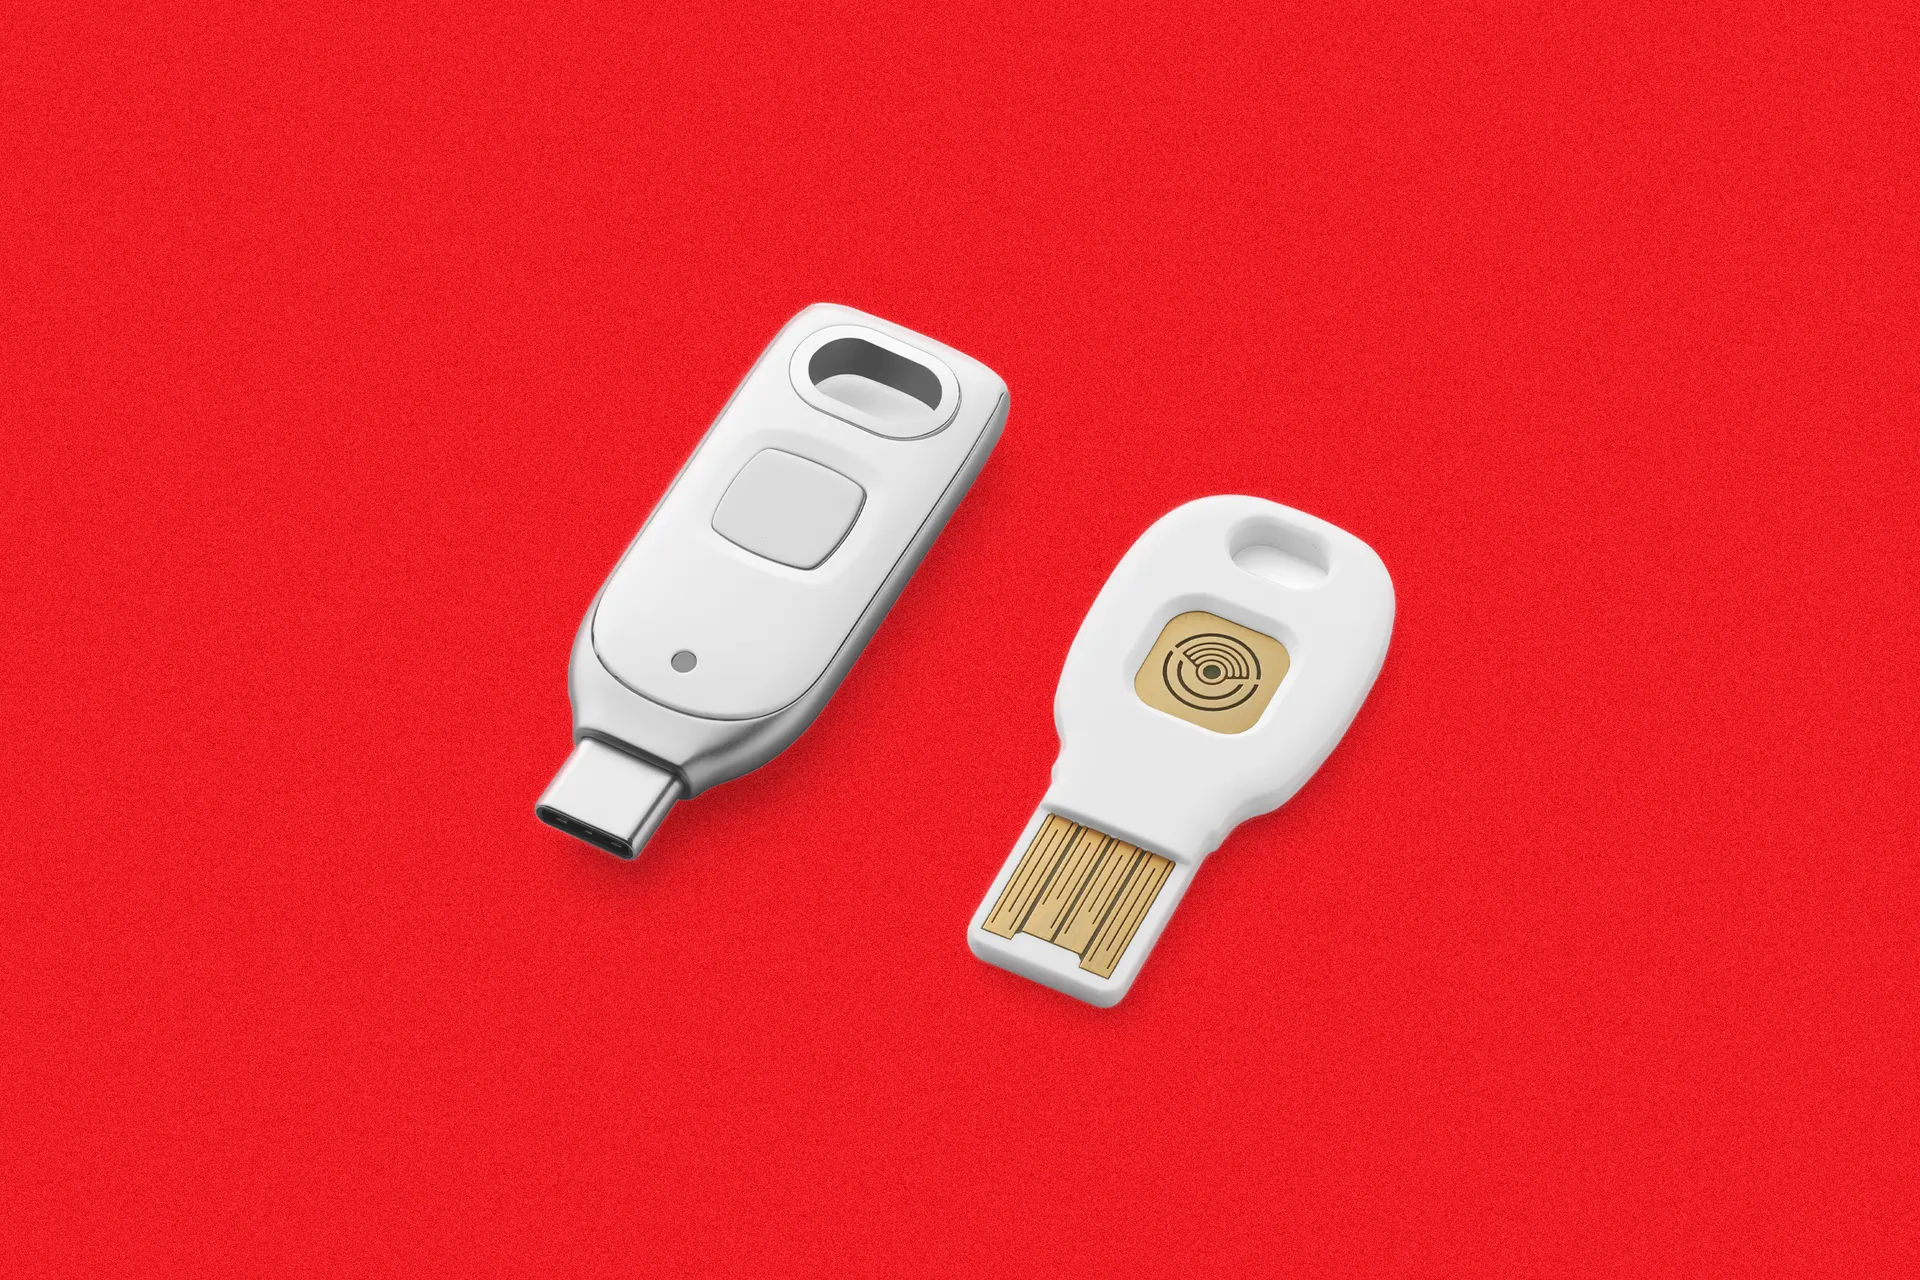 Google’s New Titan Security Key Adds Another Piece to the Password-Killing Puzzle